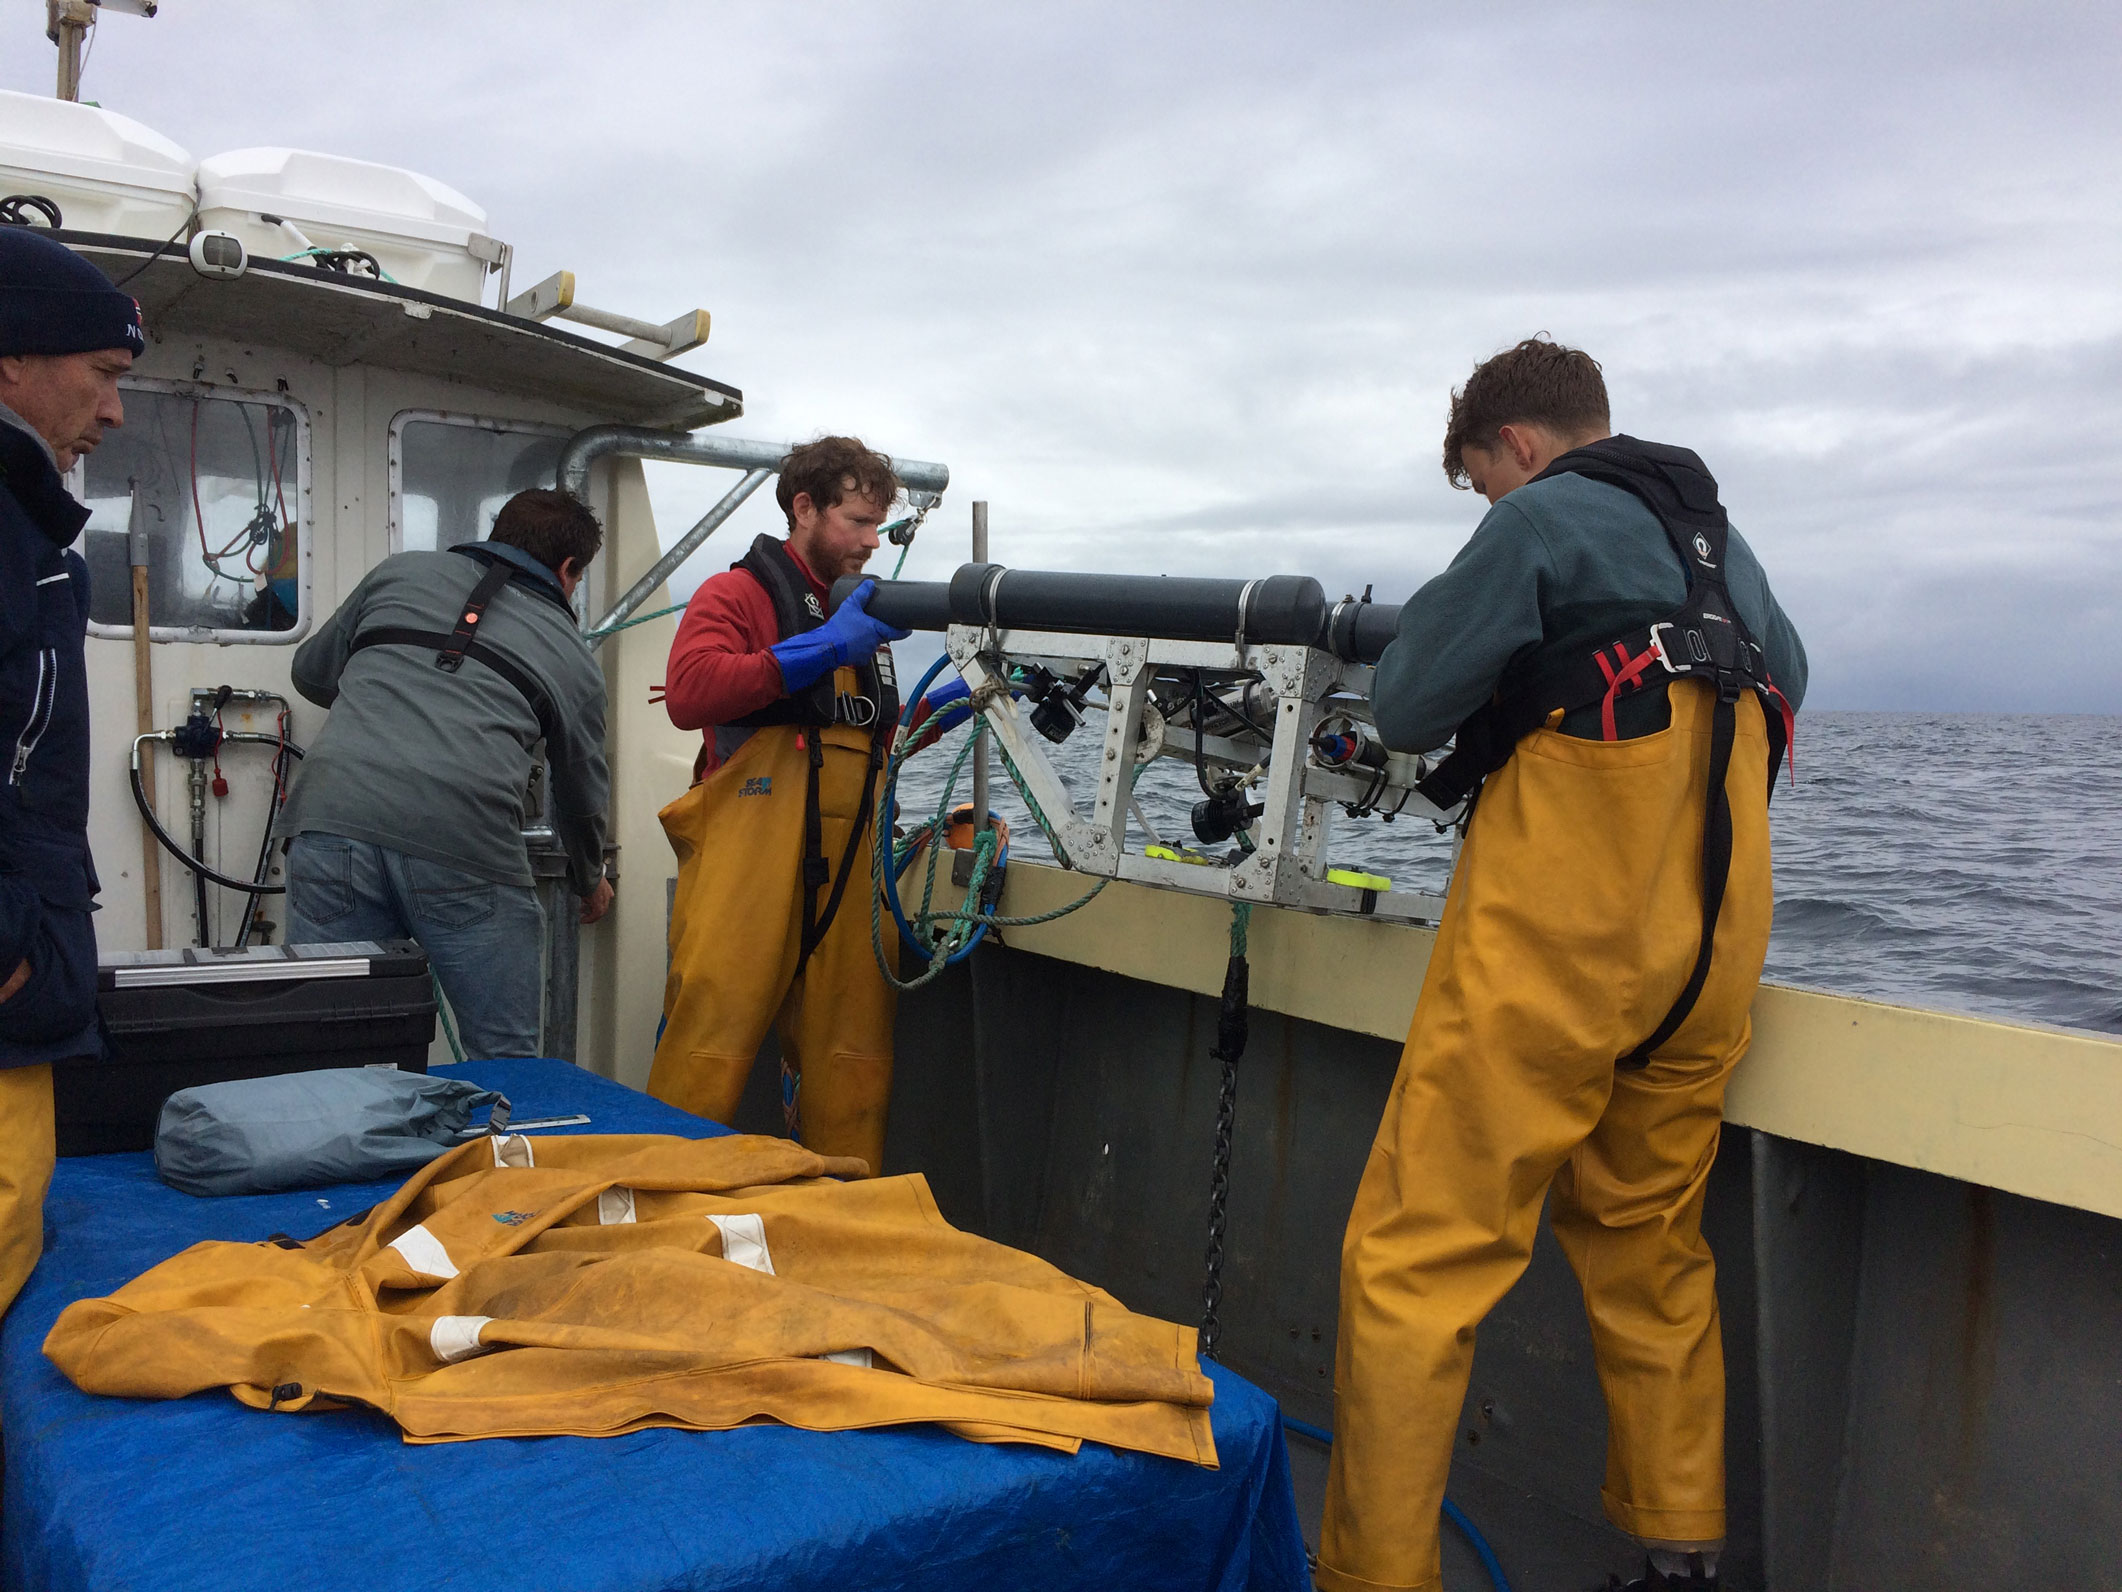 Survey crew members deploying an Underwater Towed Vehicle over the side of a fishing boat.